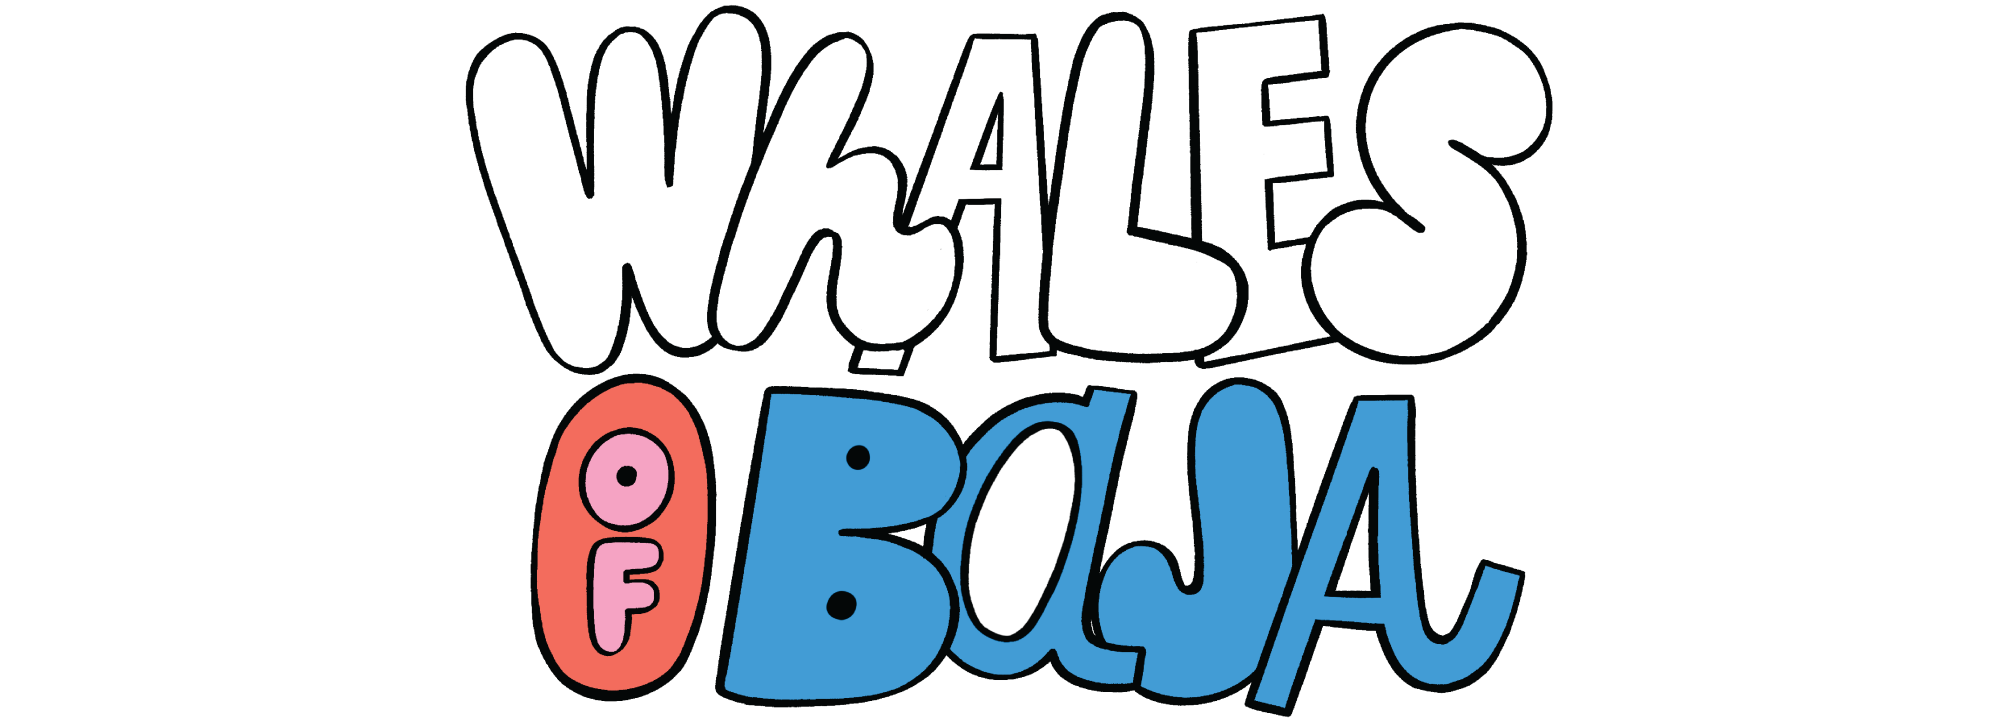 Colorful typography saying Whales of Baja